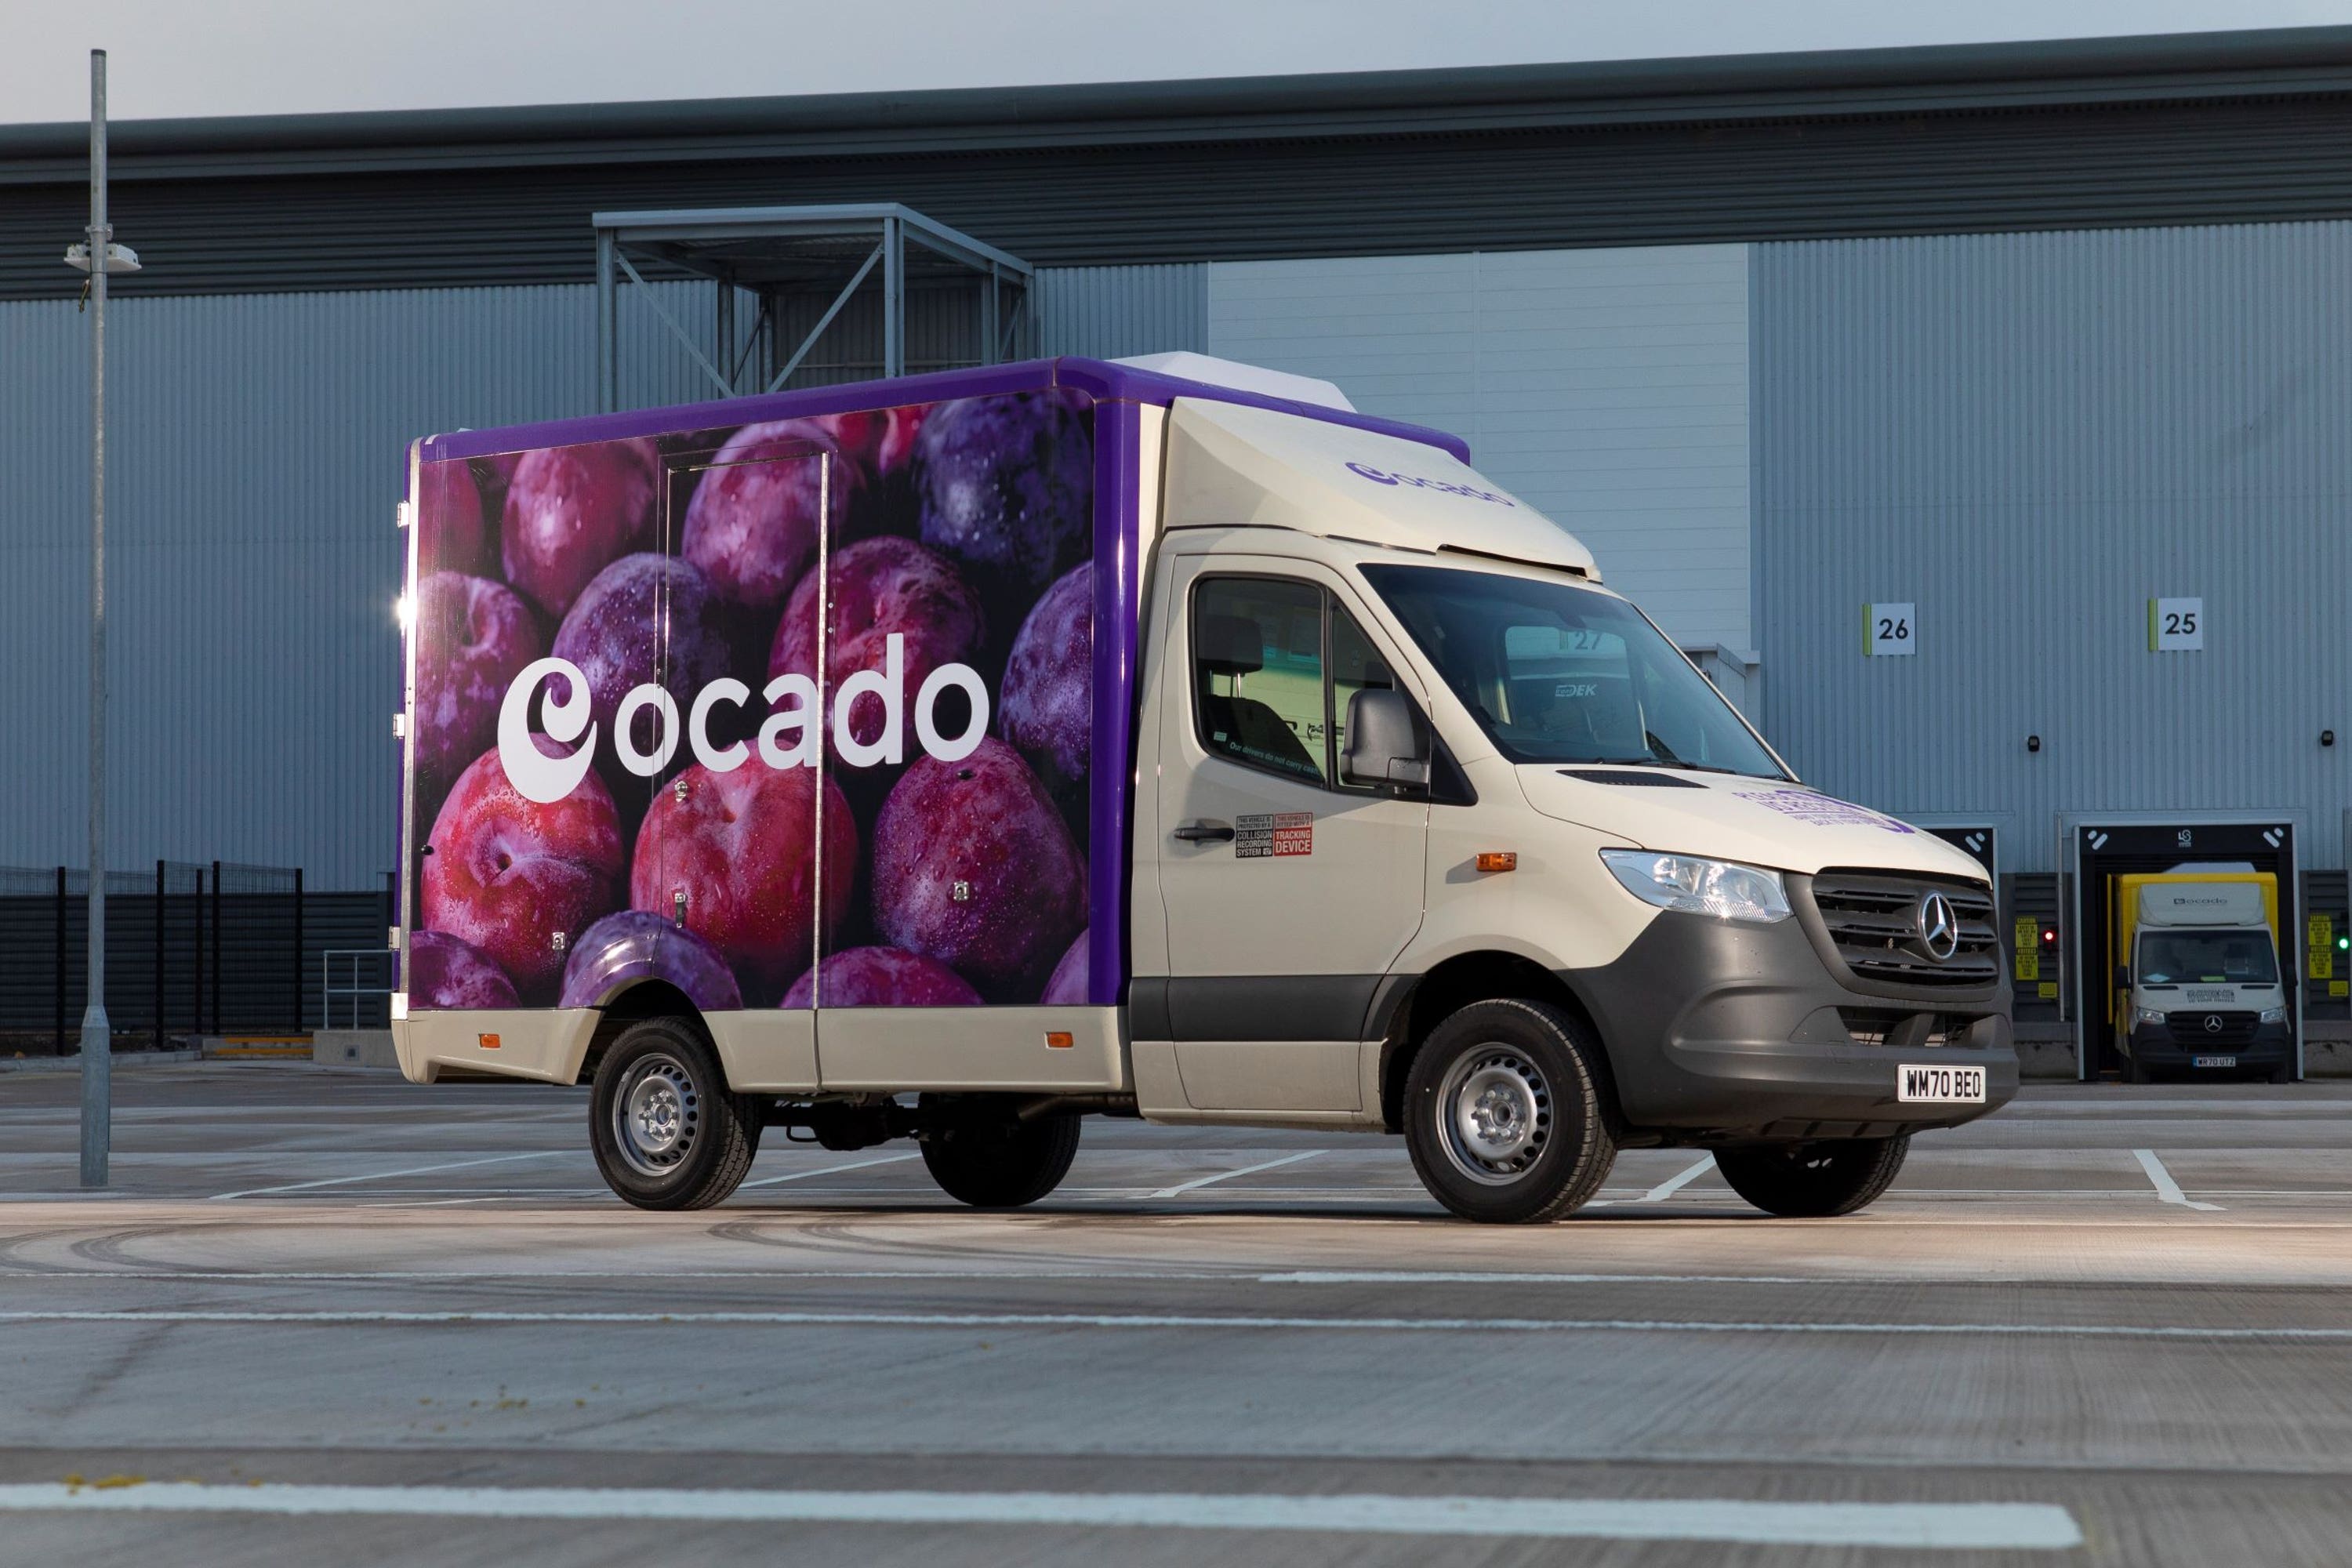 Ocado said prices rose 5.4% on average year-on-year across its products in the three months to 26 November